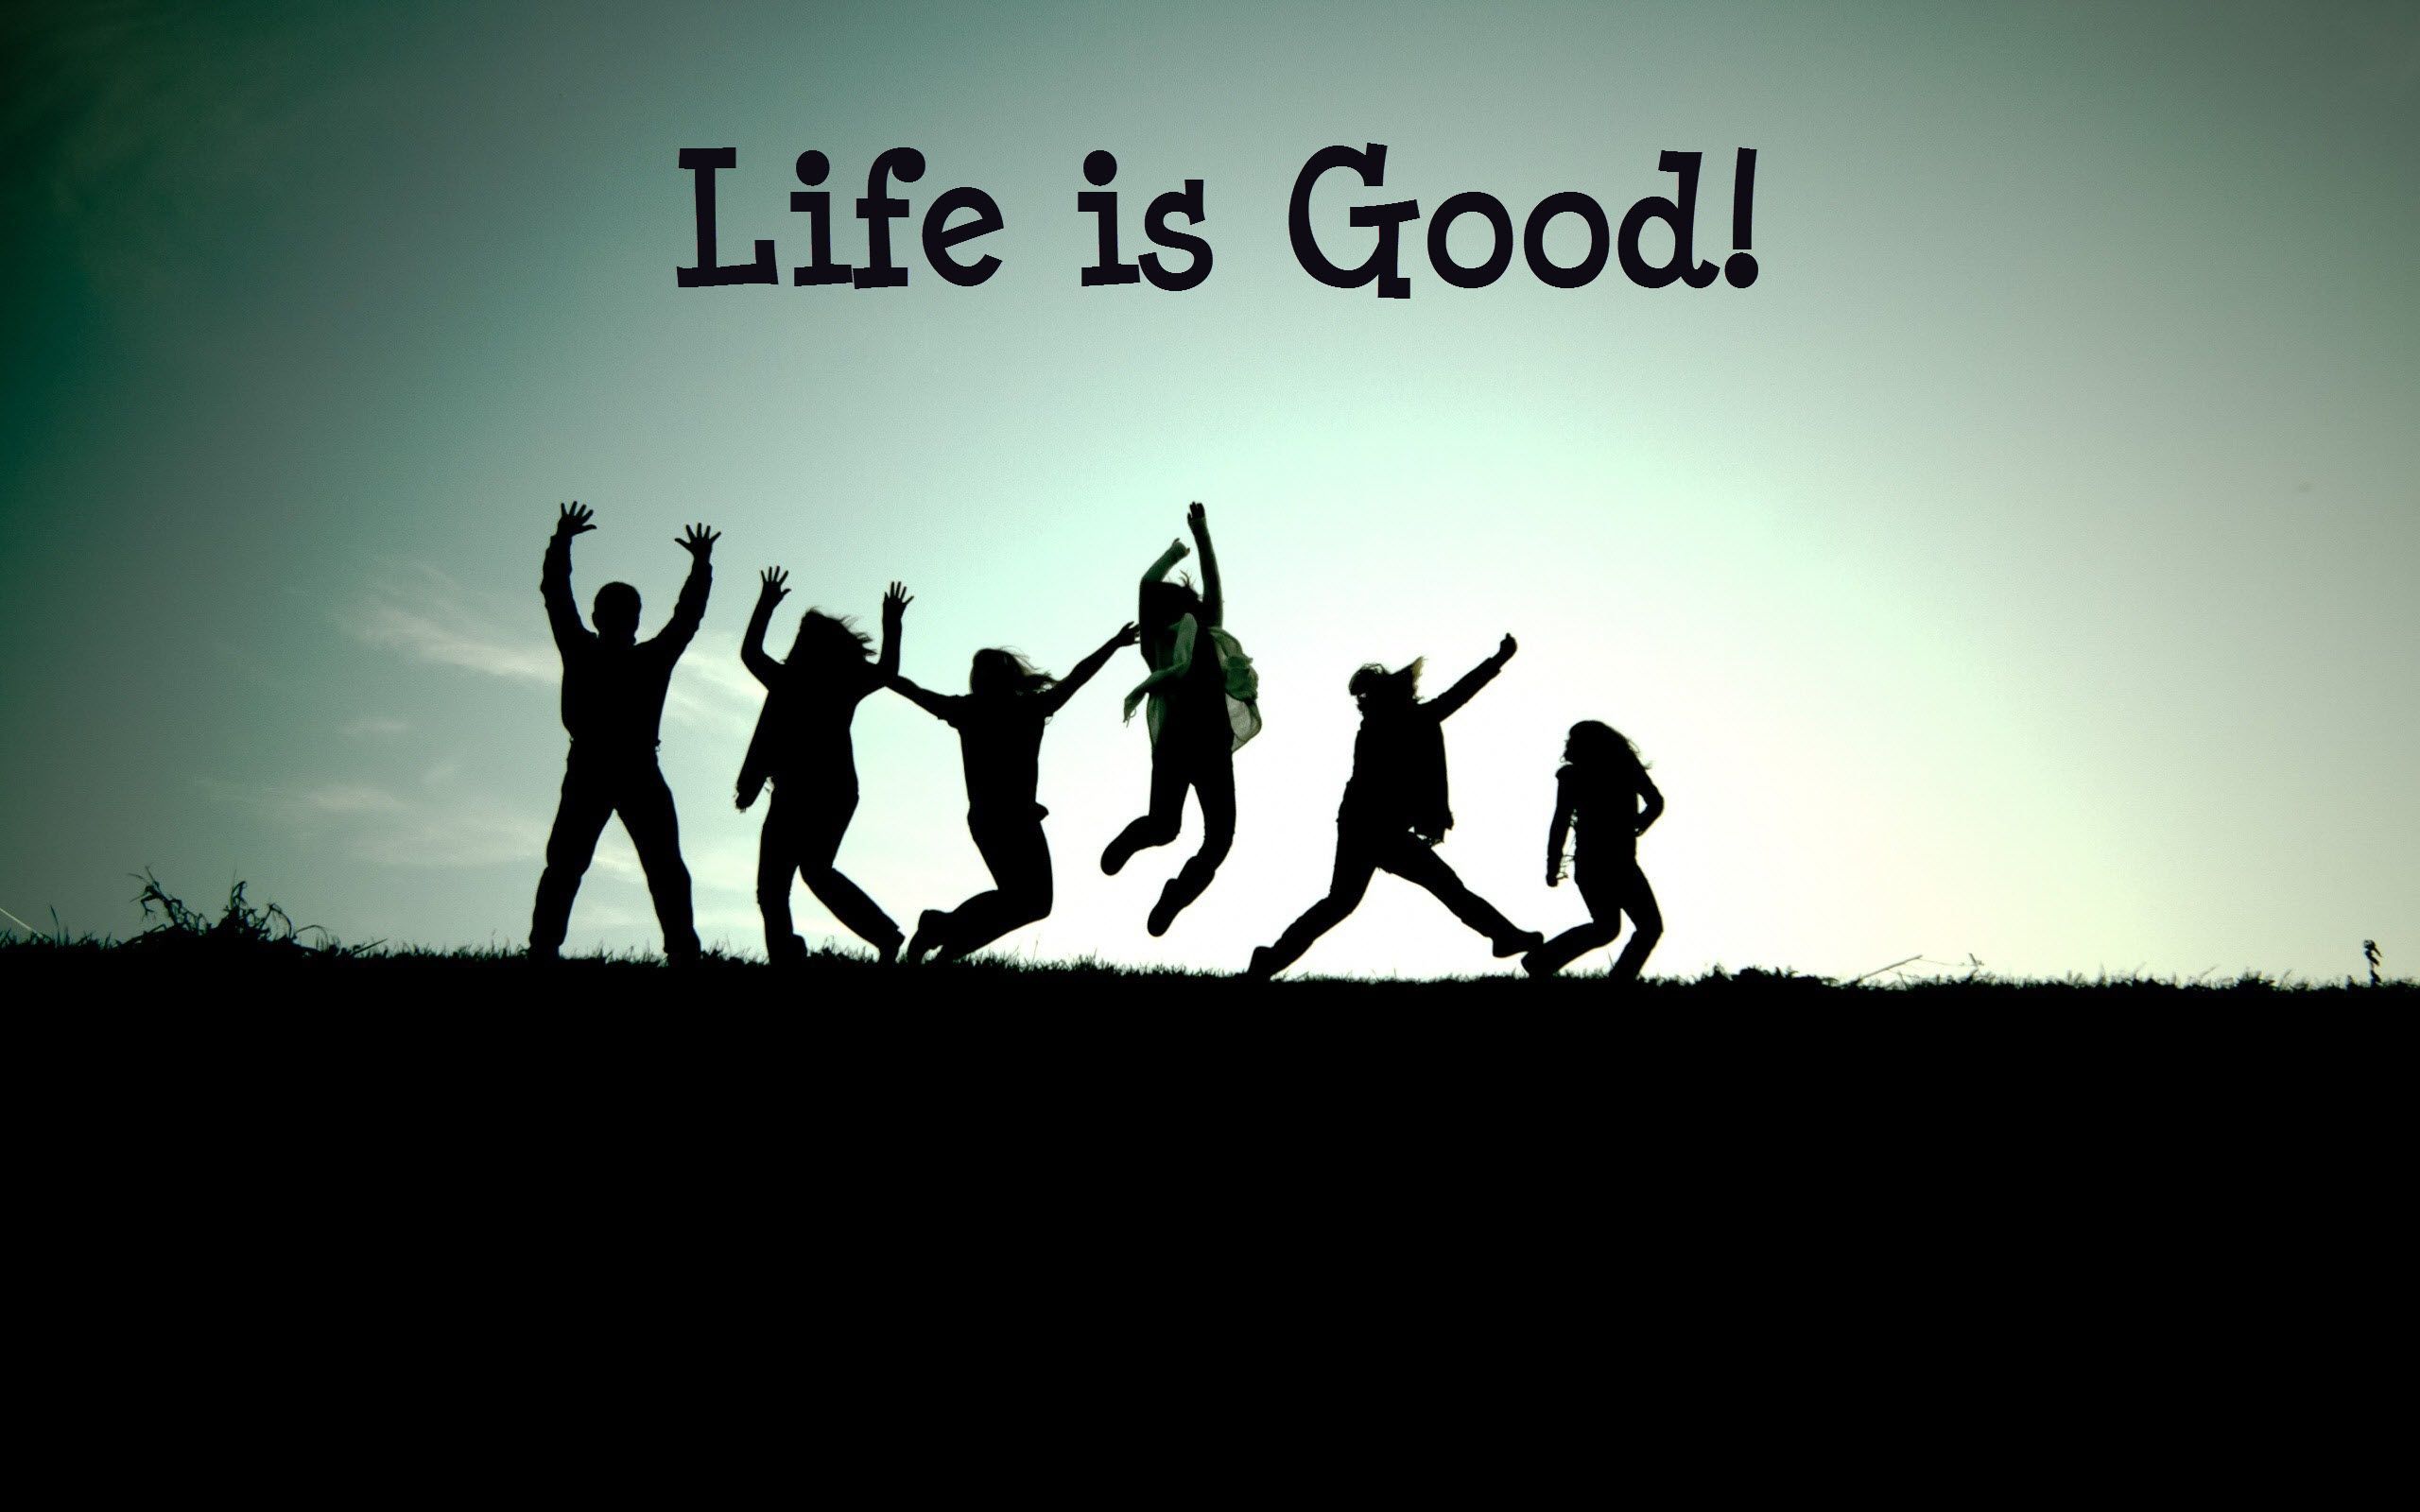 2560x1600px Life Is Good (270.32 KB).09.2015